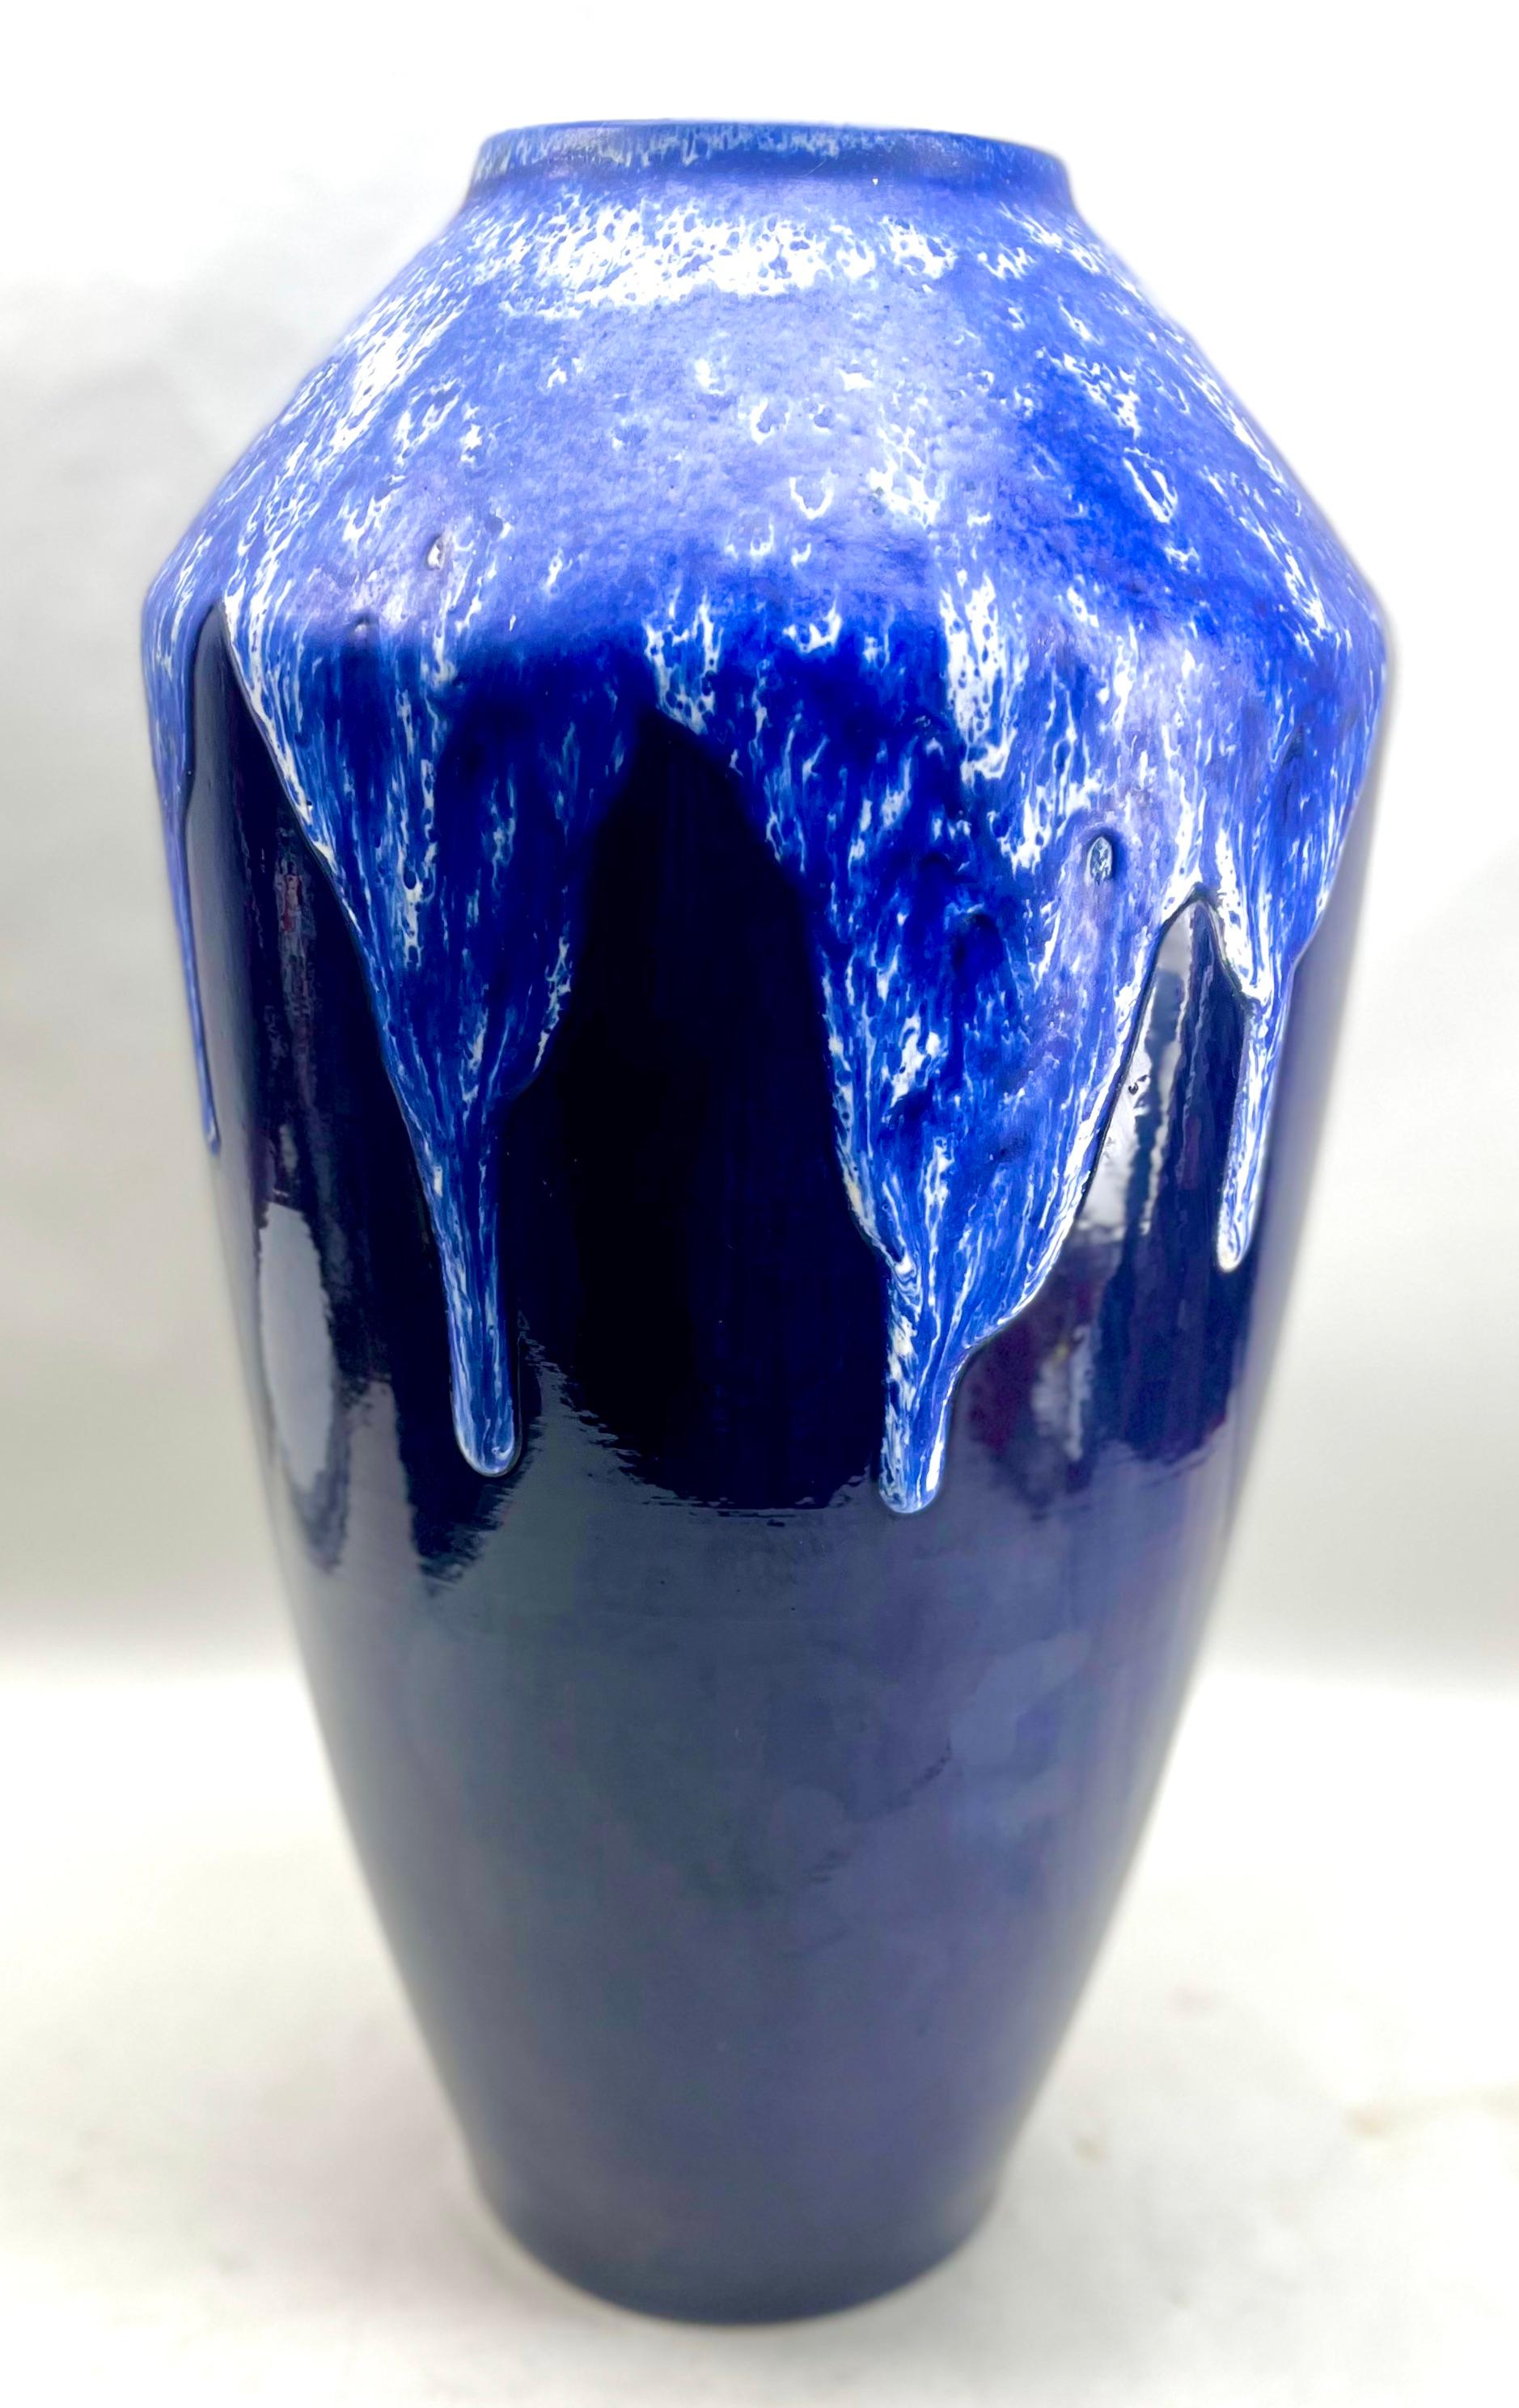 Vintage Large Fat Lava Floor Vase with Cobalt Blue Drip-Glaze 88-40 W-Germany'

Large Bay W Germany
Classic fat lava Cobalt Blue drip-glaze Floor vase 
Glazed pottery.
Stamped on the base. 540-48 W-Germany.
Measures: 50 x 26 cm 

The piece is in